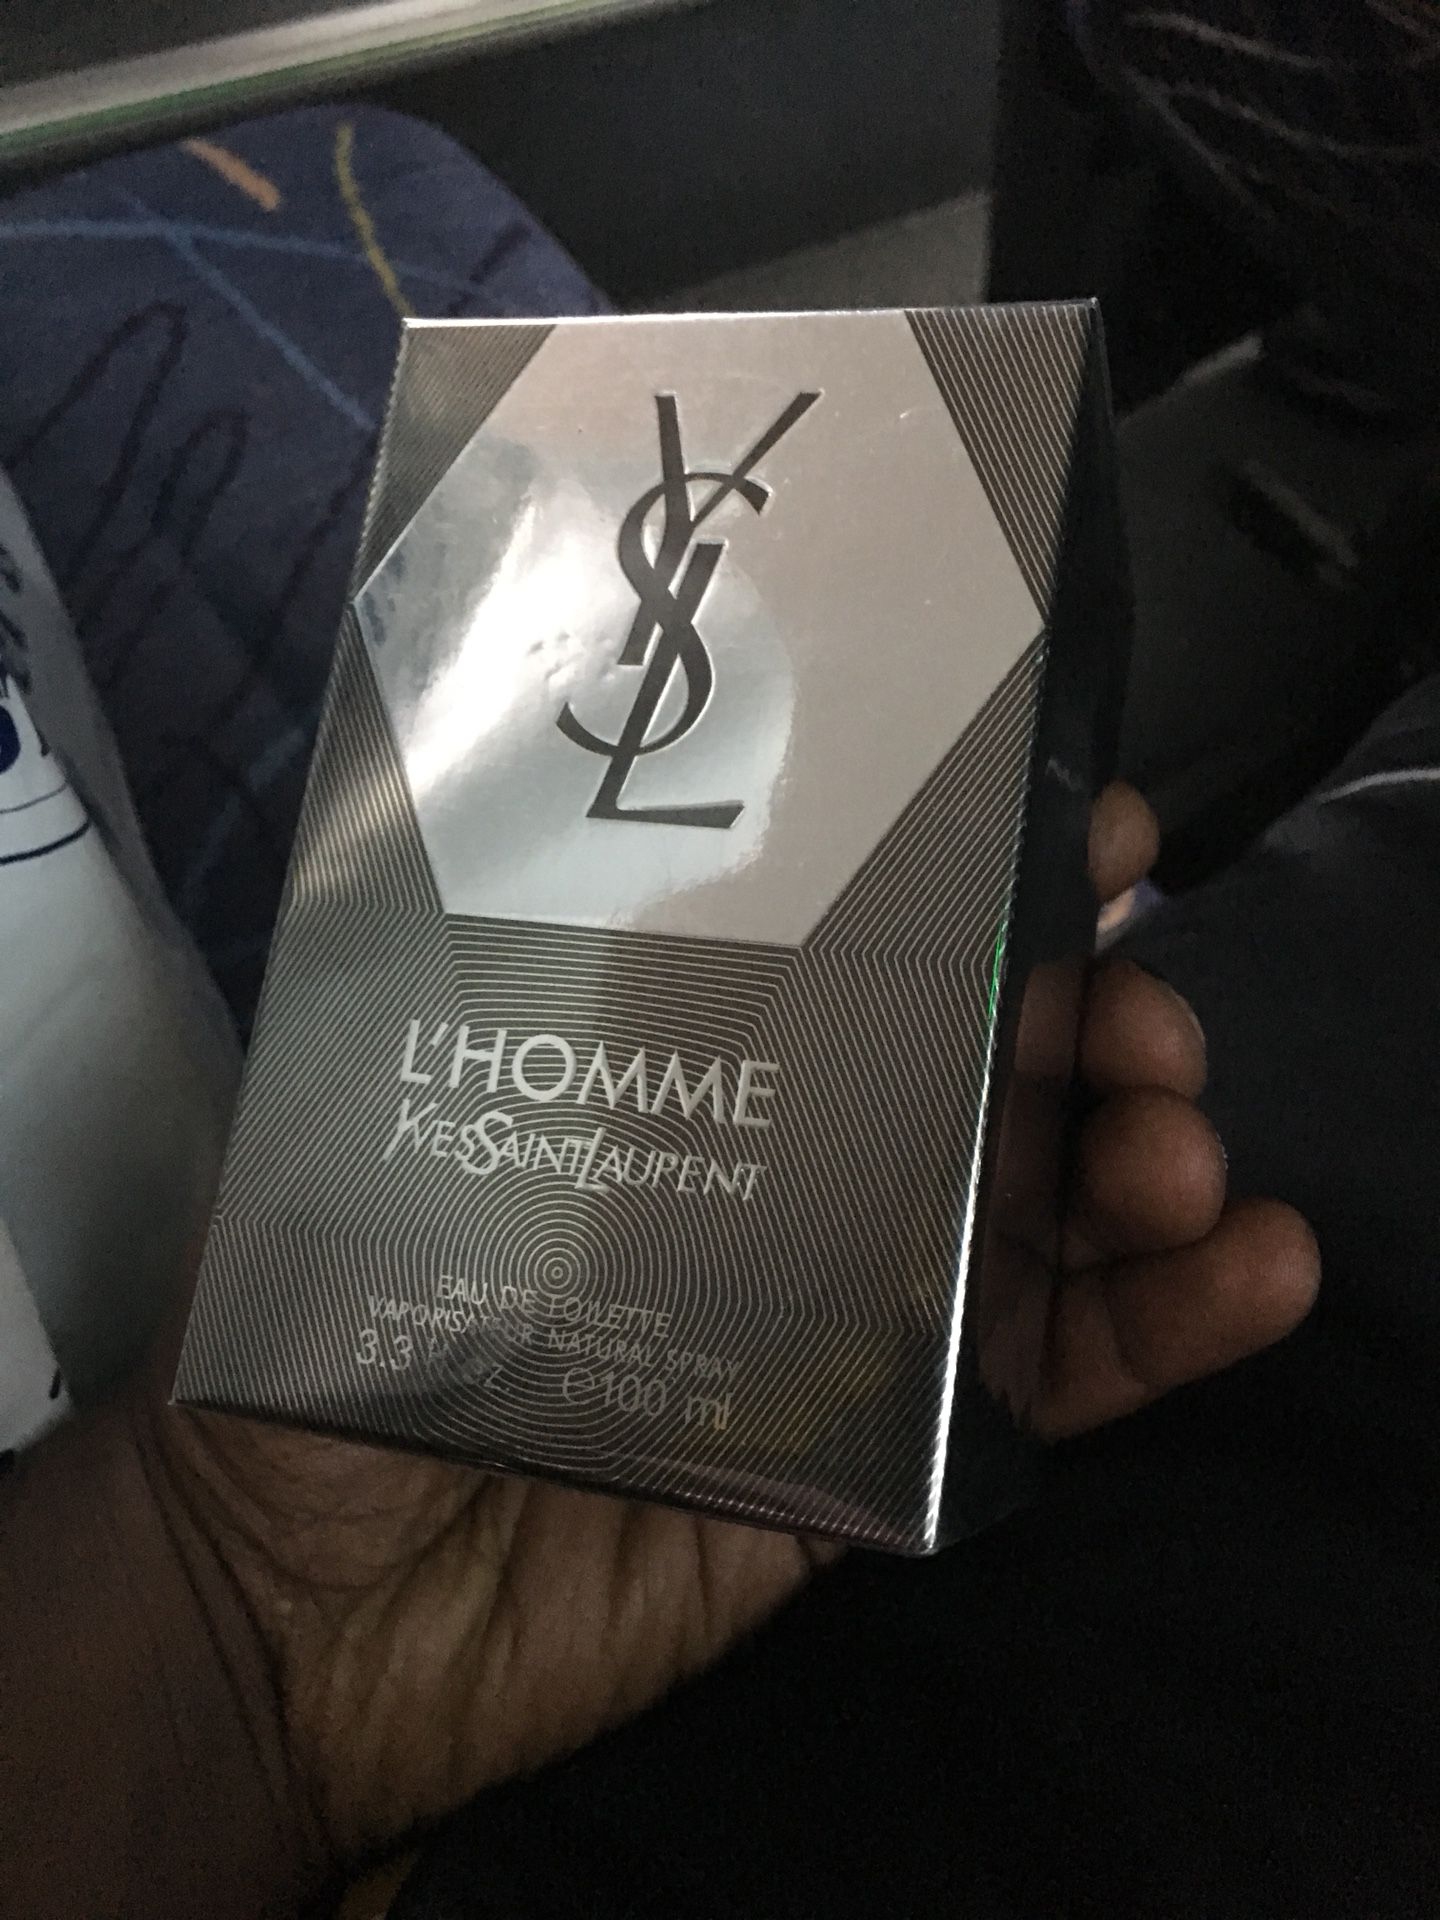 Ysl cologne Smells amazing